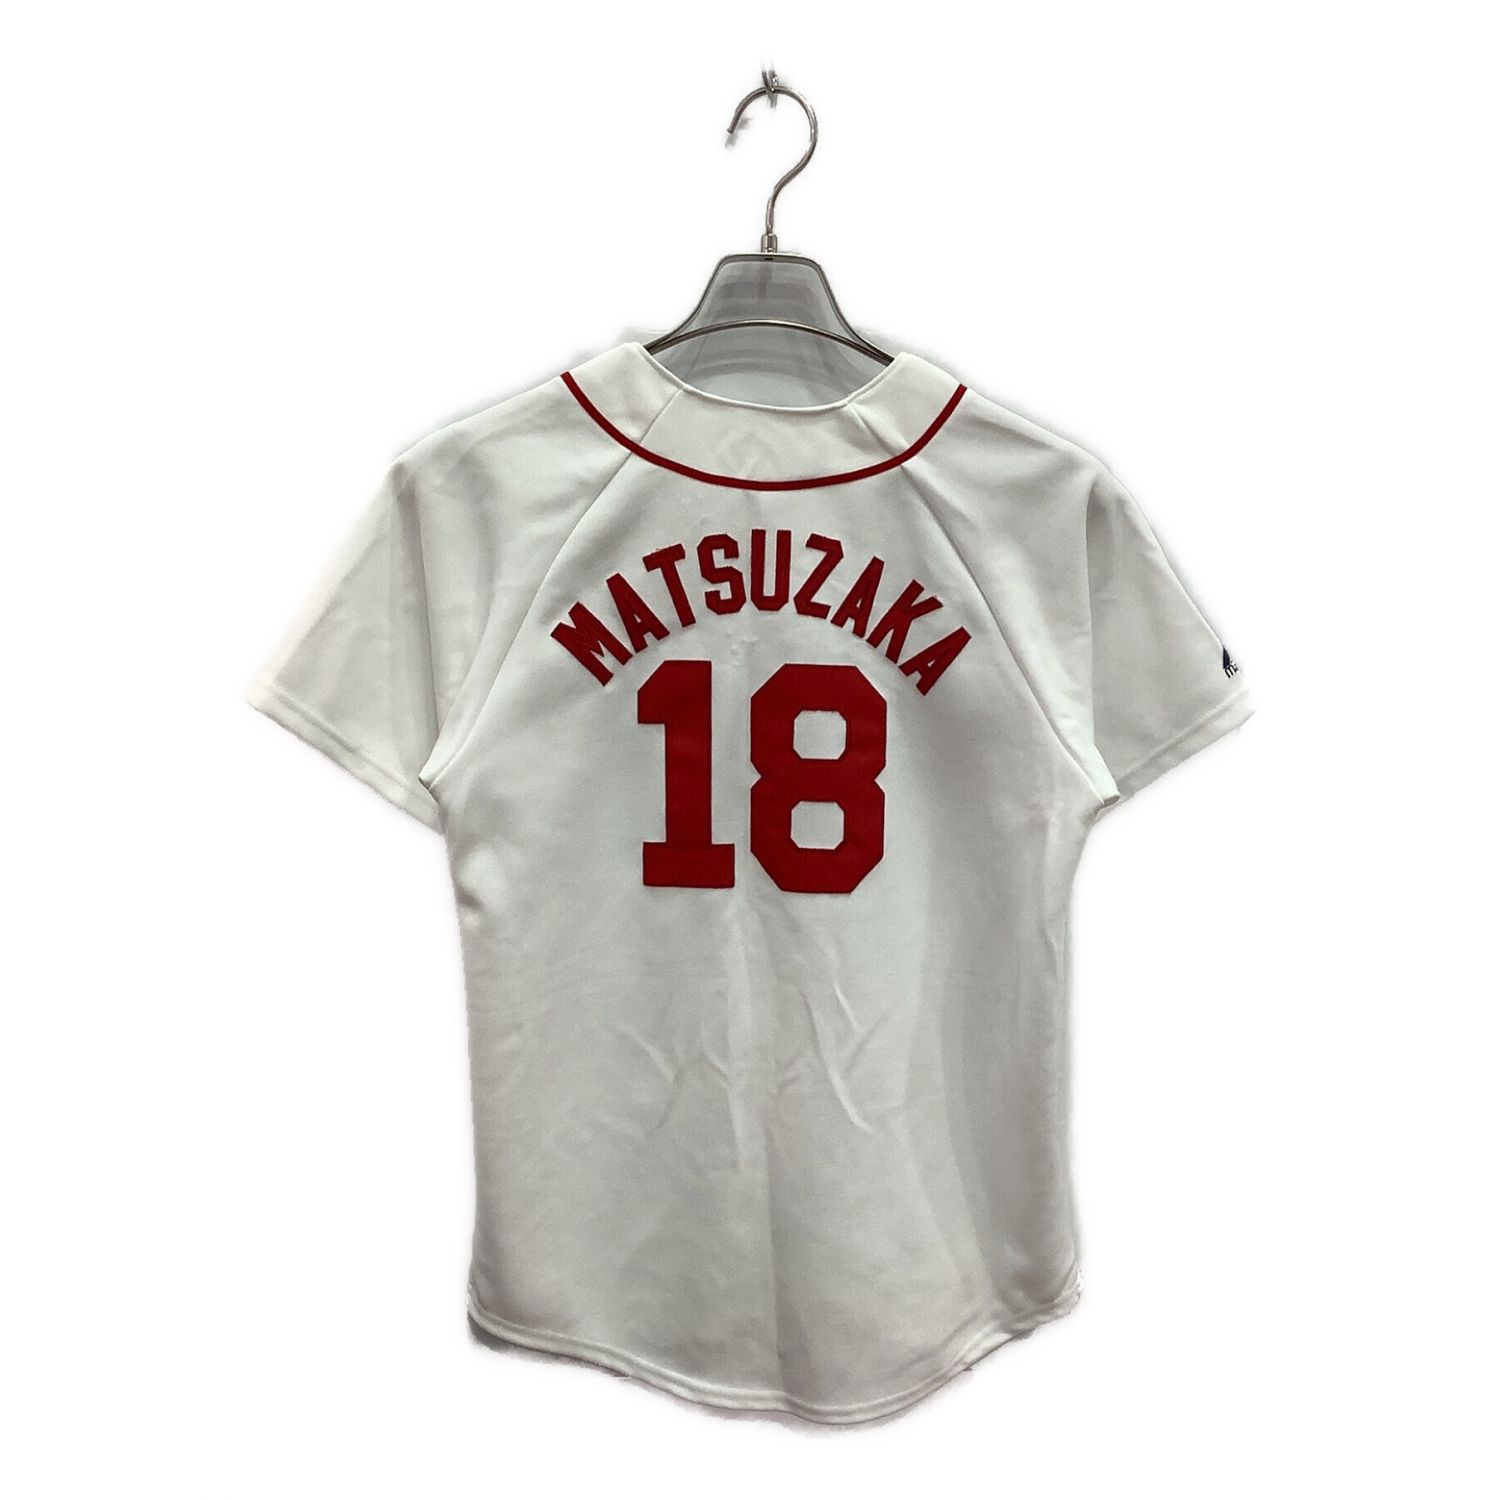 RED SOX 応援グッズ SIZE L キッズ ユニフォーム 【18】松坂大輔 